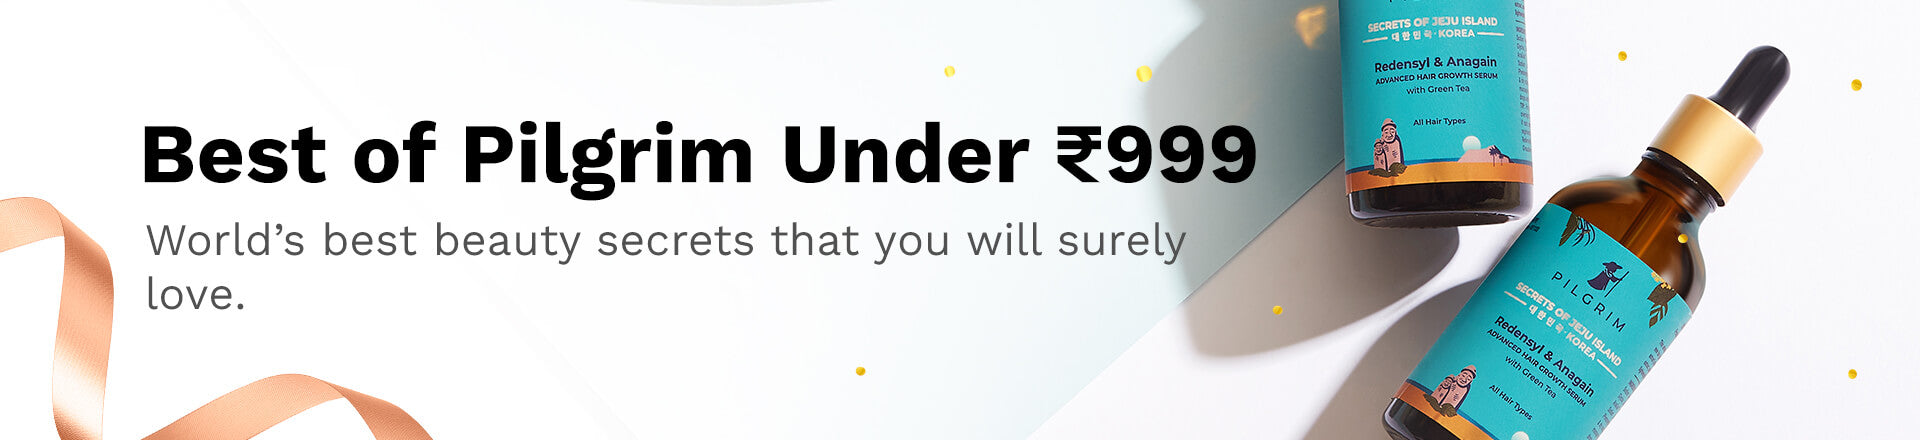 Products under ₹999